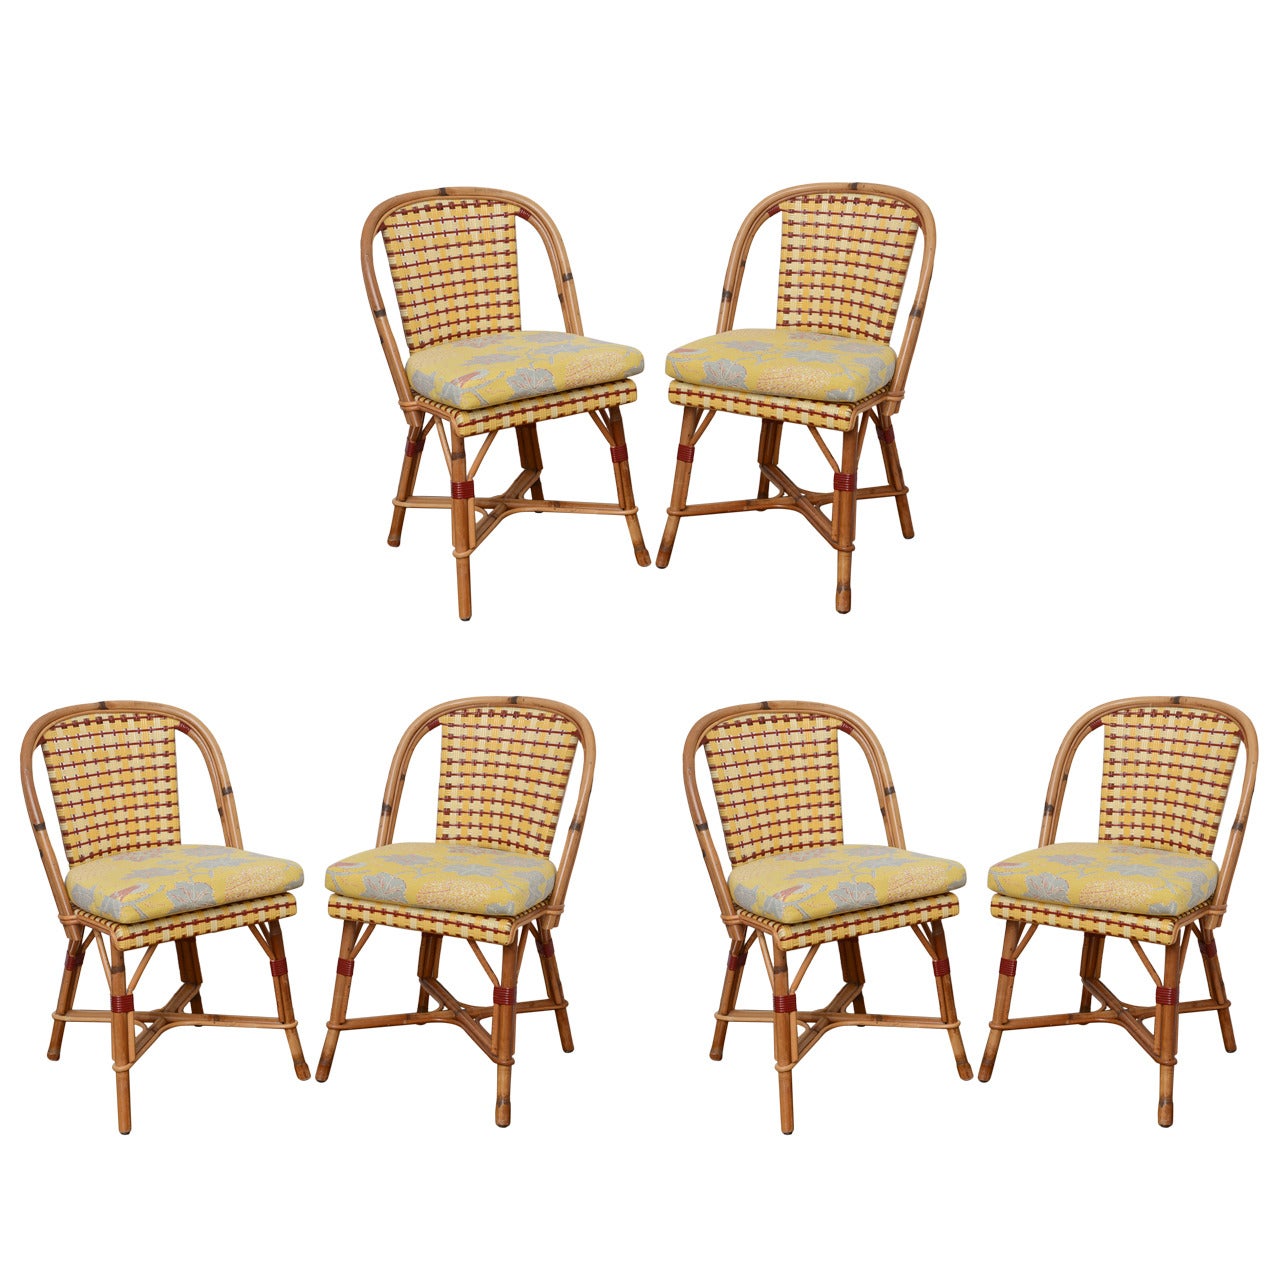 Set of Six French Rattan and Caned "Alma" Cafe Chairs by Maison Drucker